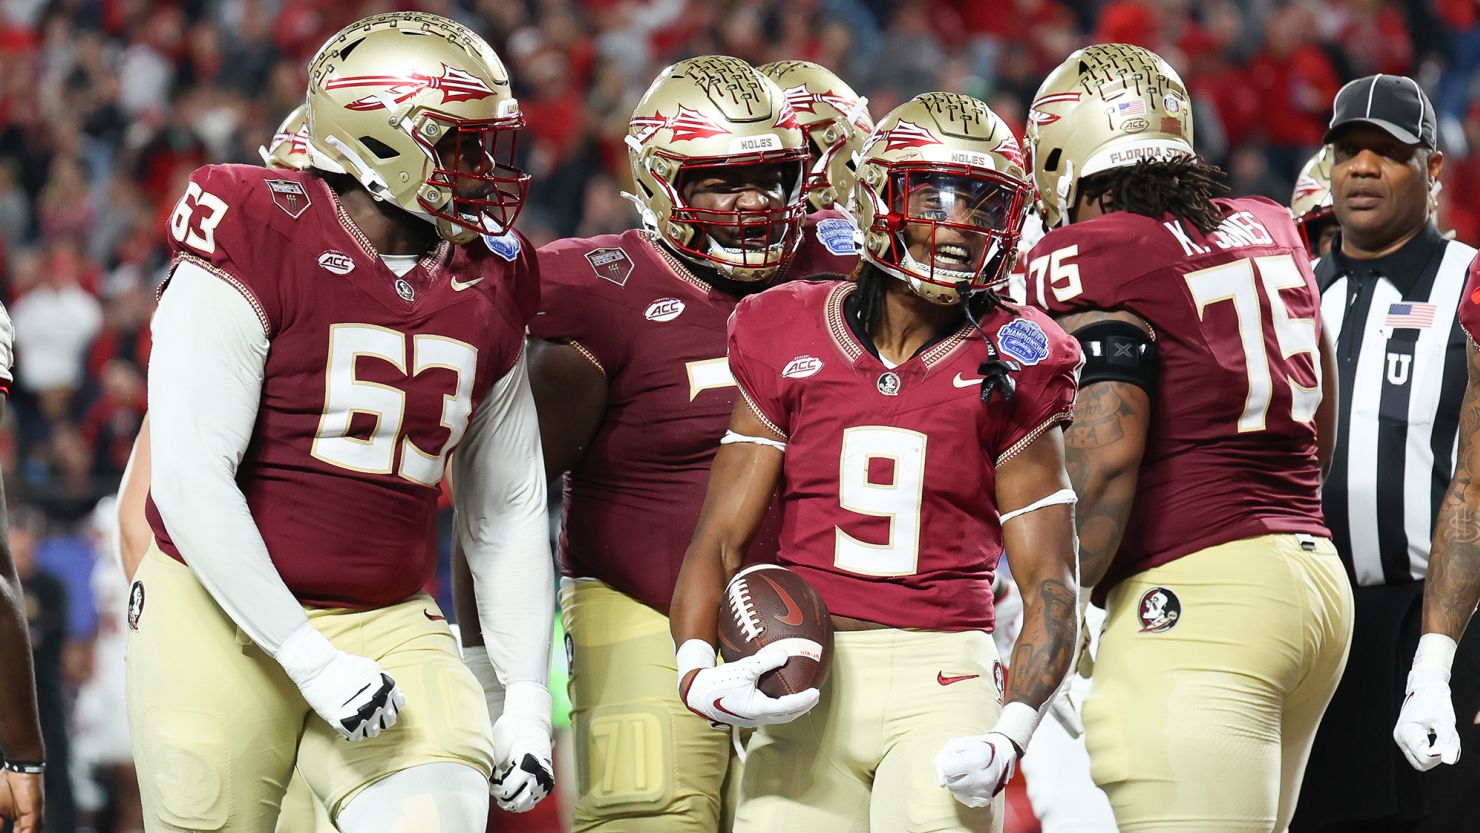 CHARLOTTE, NORTH CAROLINA - DECEMBER 2: Lawrance Toafili #9 of the Florida State Seminoles celebrates with the team after scoring a touchdown in the third quarter against the Louisville Cardinals during the ACC Championship at Bank of America Stadium on December 2, 2023 in Charlotte, North Carolina. (Photo by Isaiah Vazquez/Getty Images)